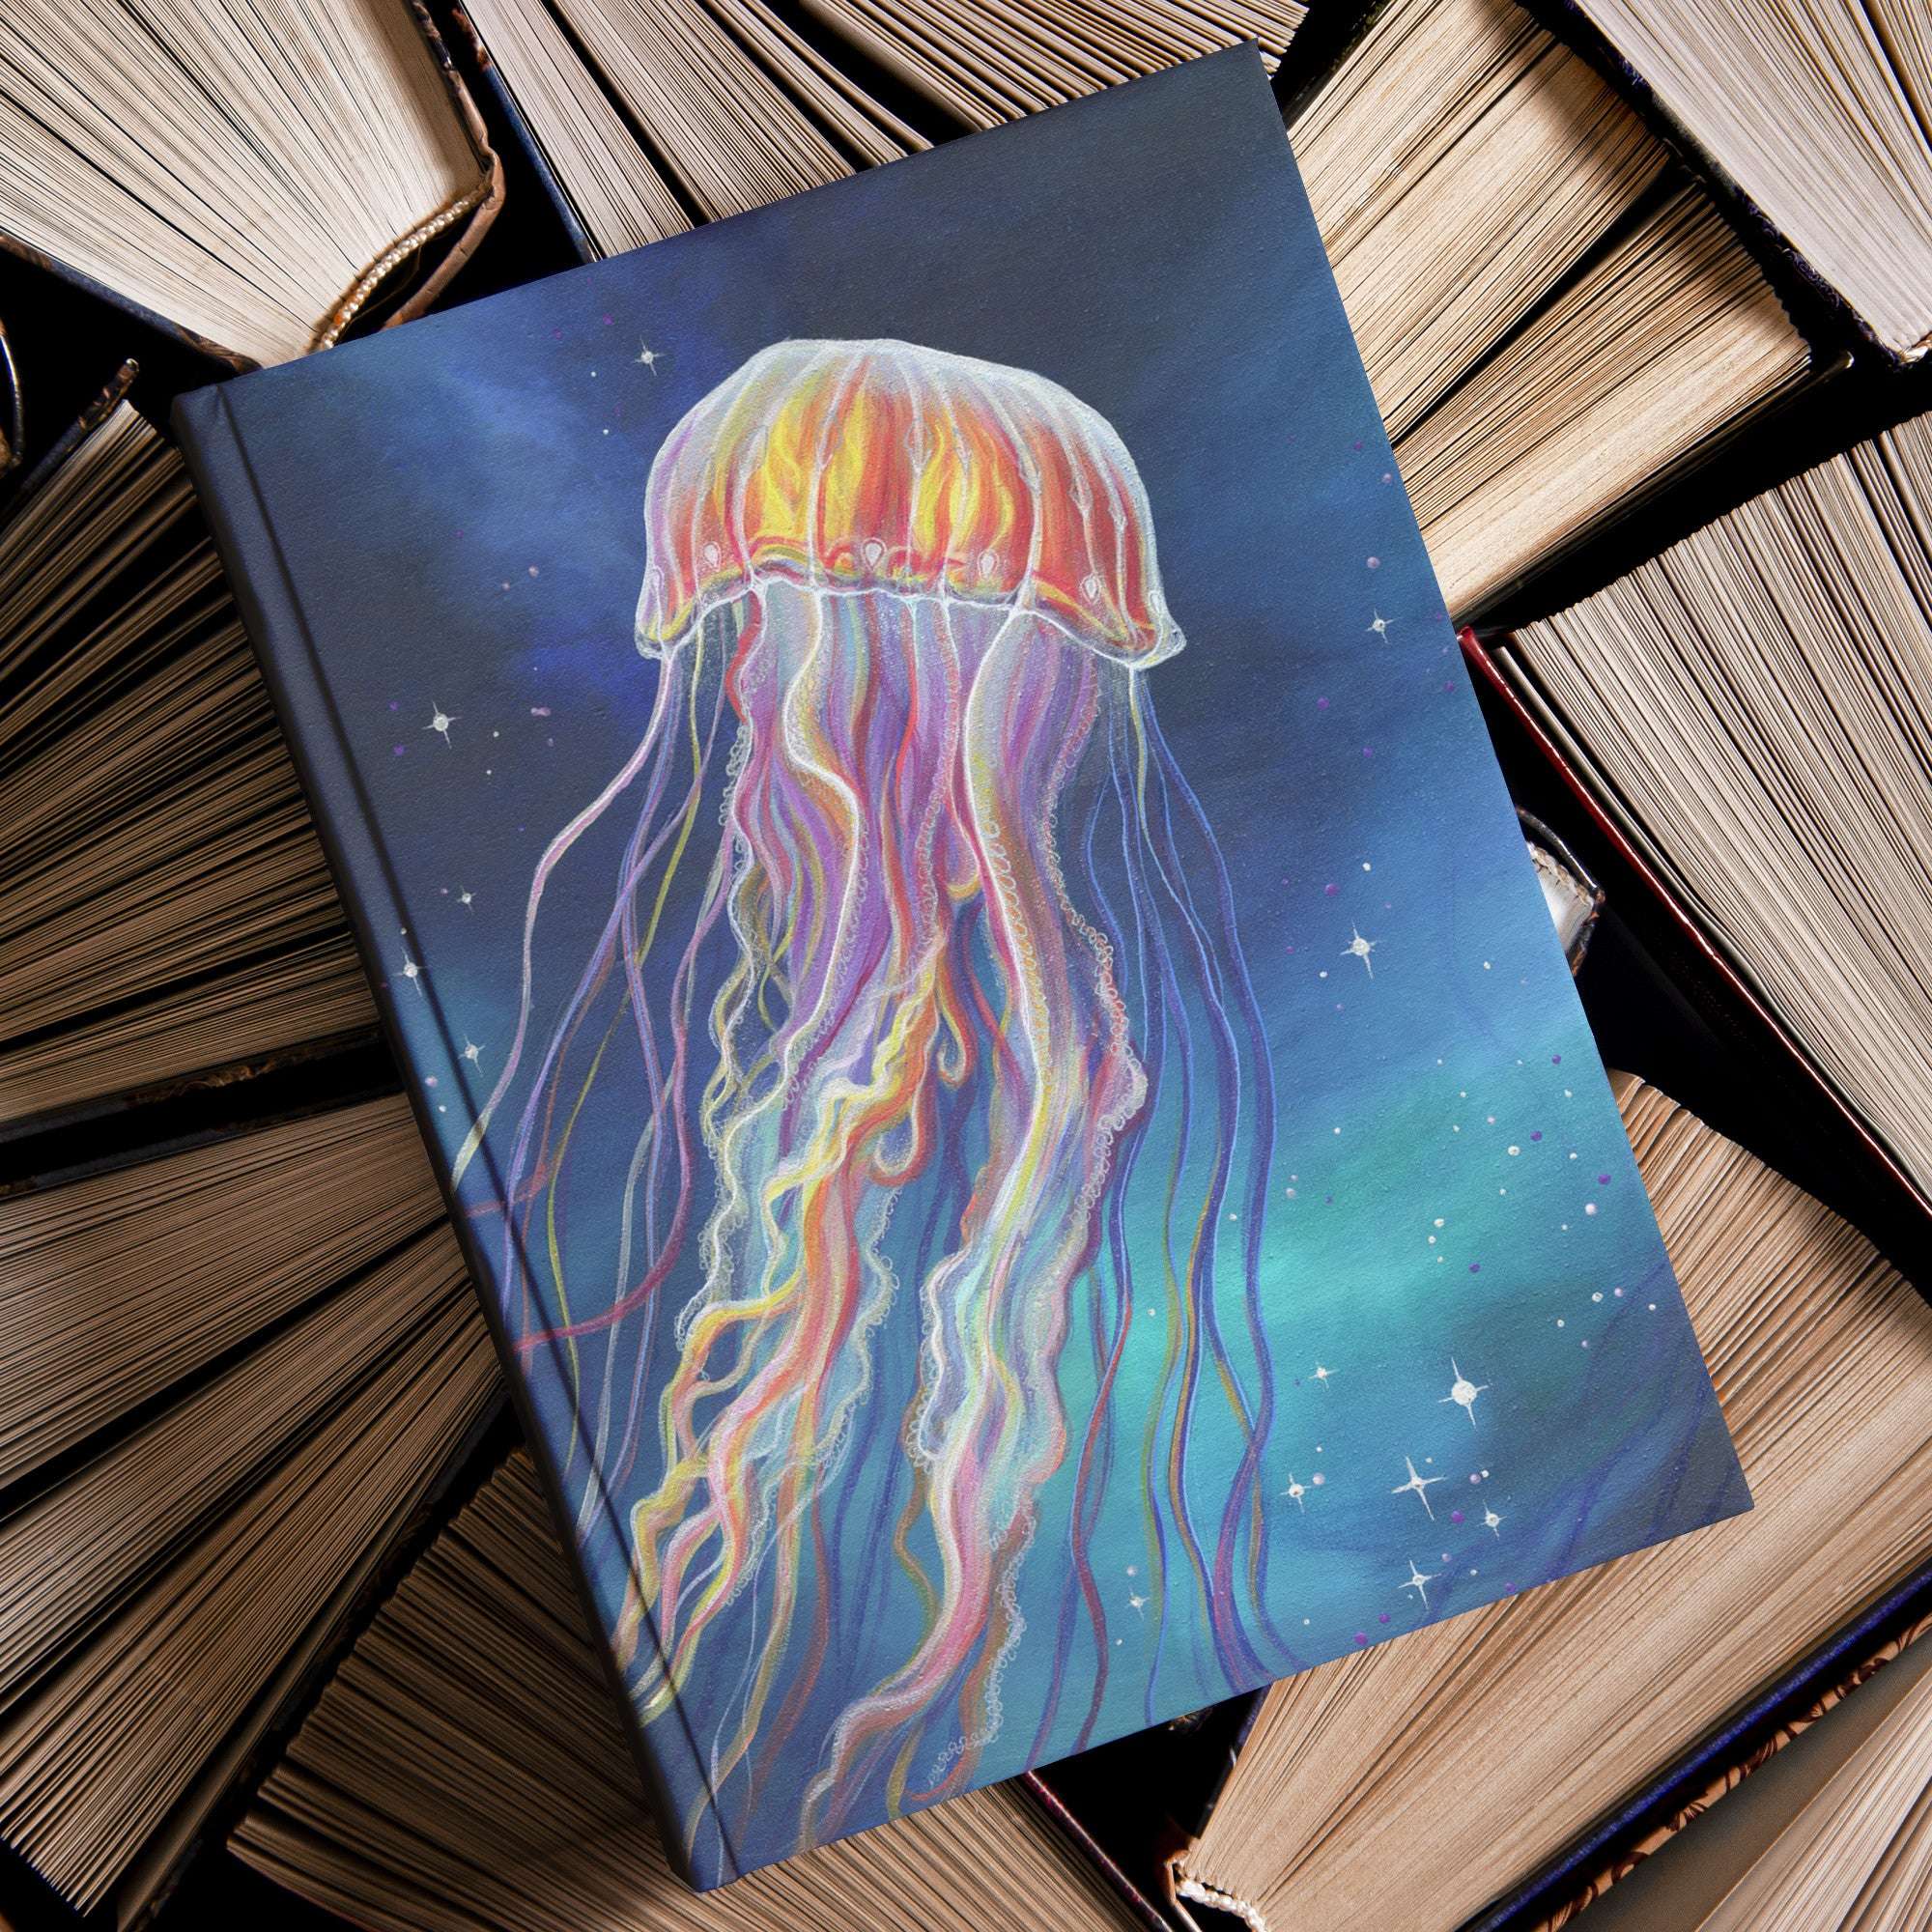 A Jellyfish Journal with a vibrant jellyfish illustration is placed on top of a stack of old books.